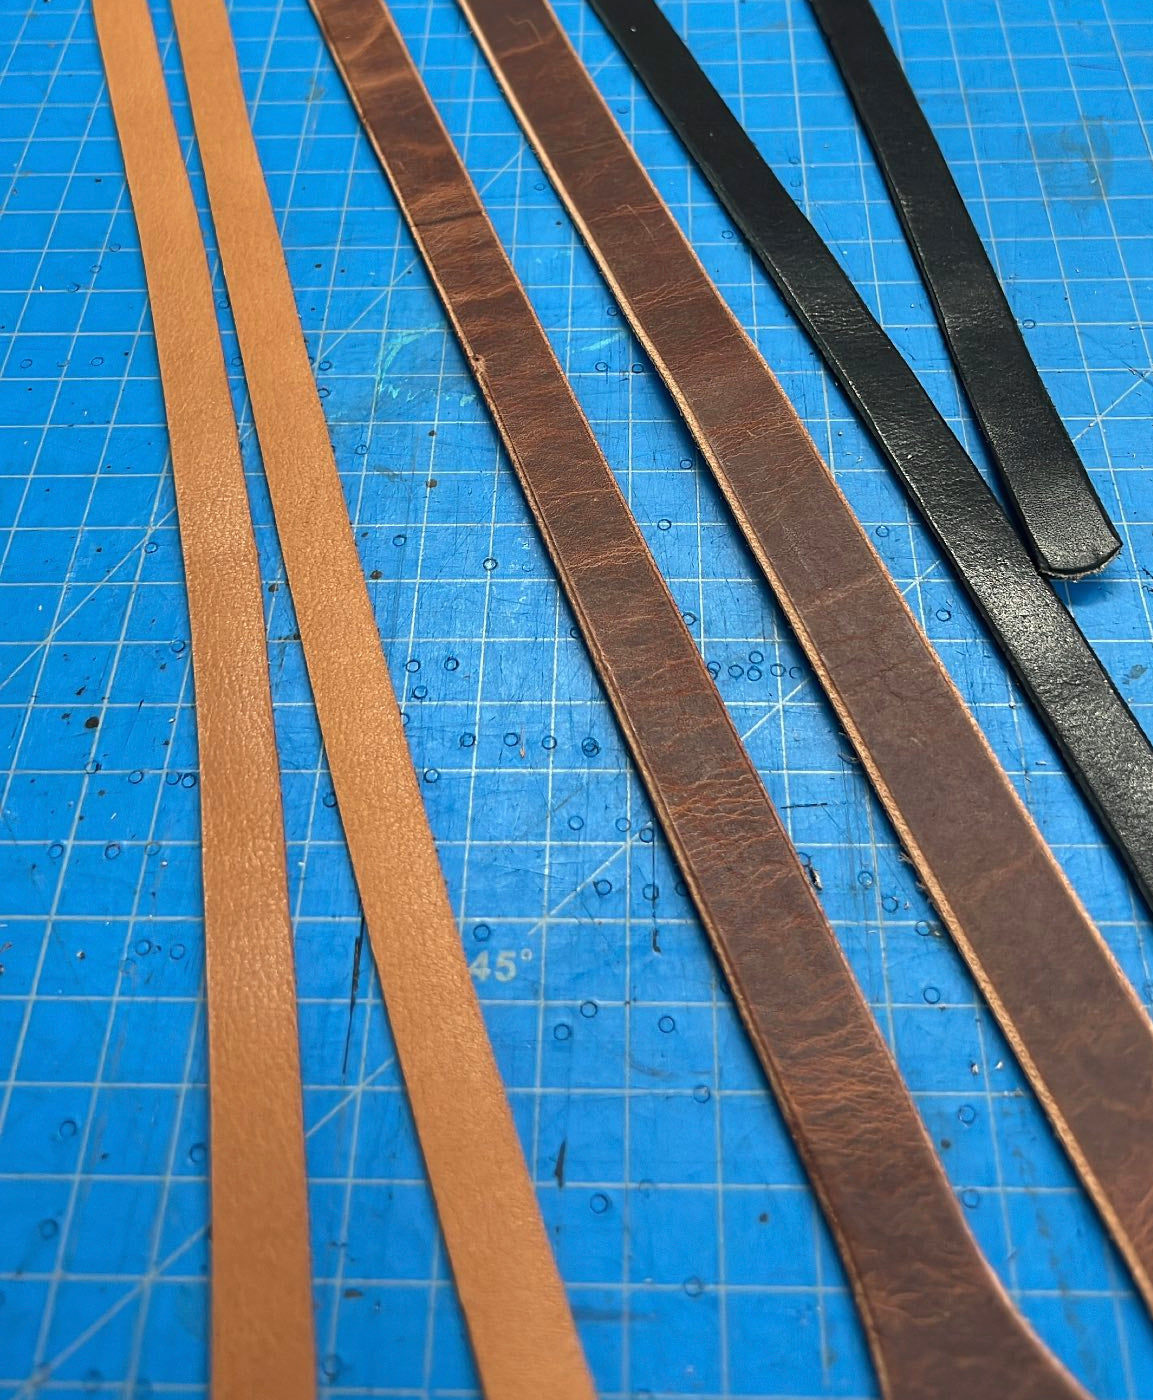 30” x 3/4” Leather Straps plus rivets Qty 2 for bag making, sewing